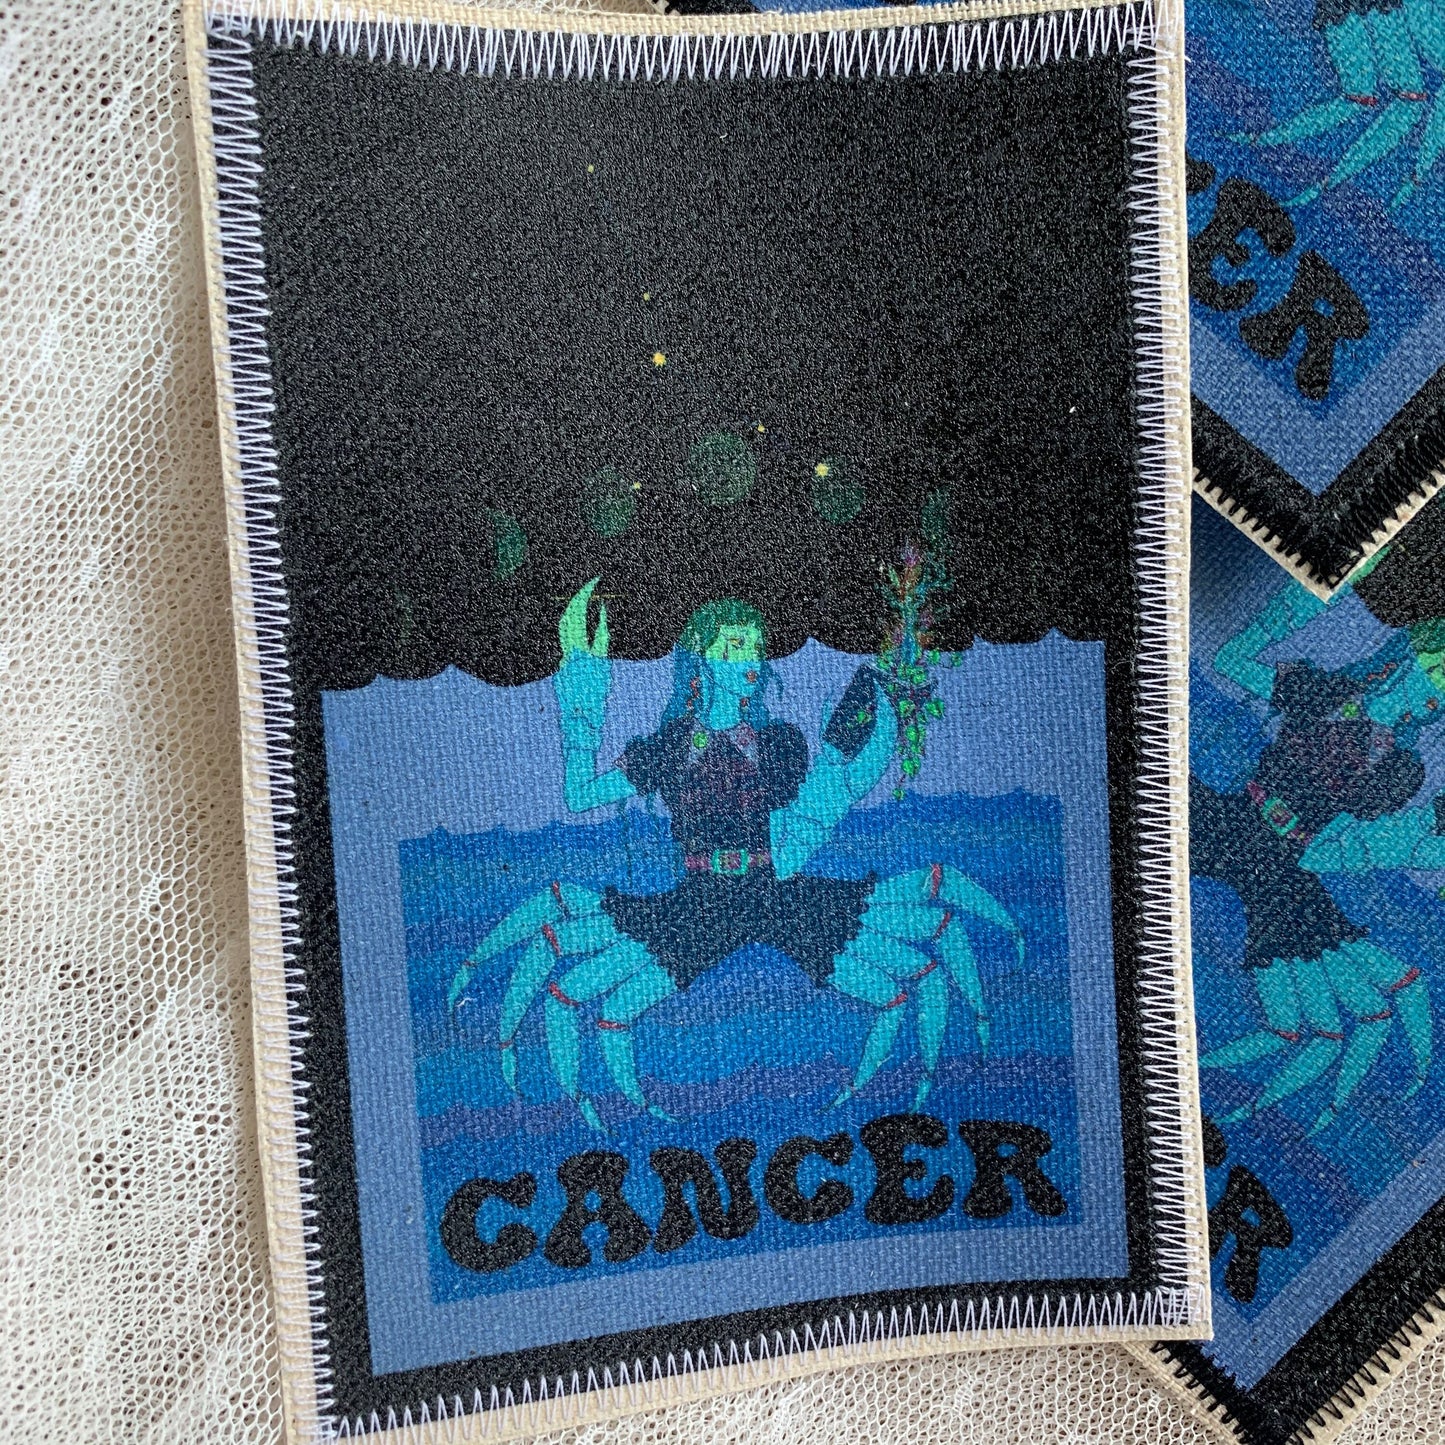 Cancer Patch